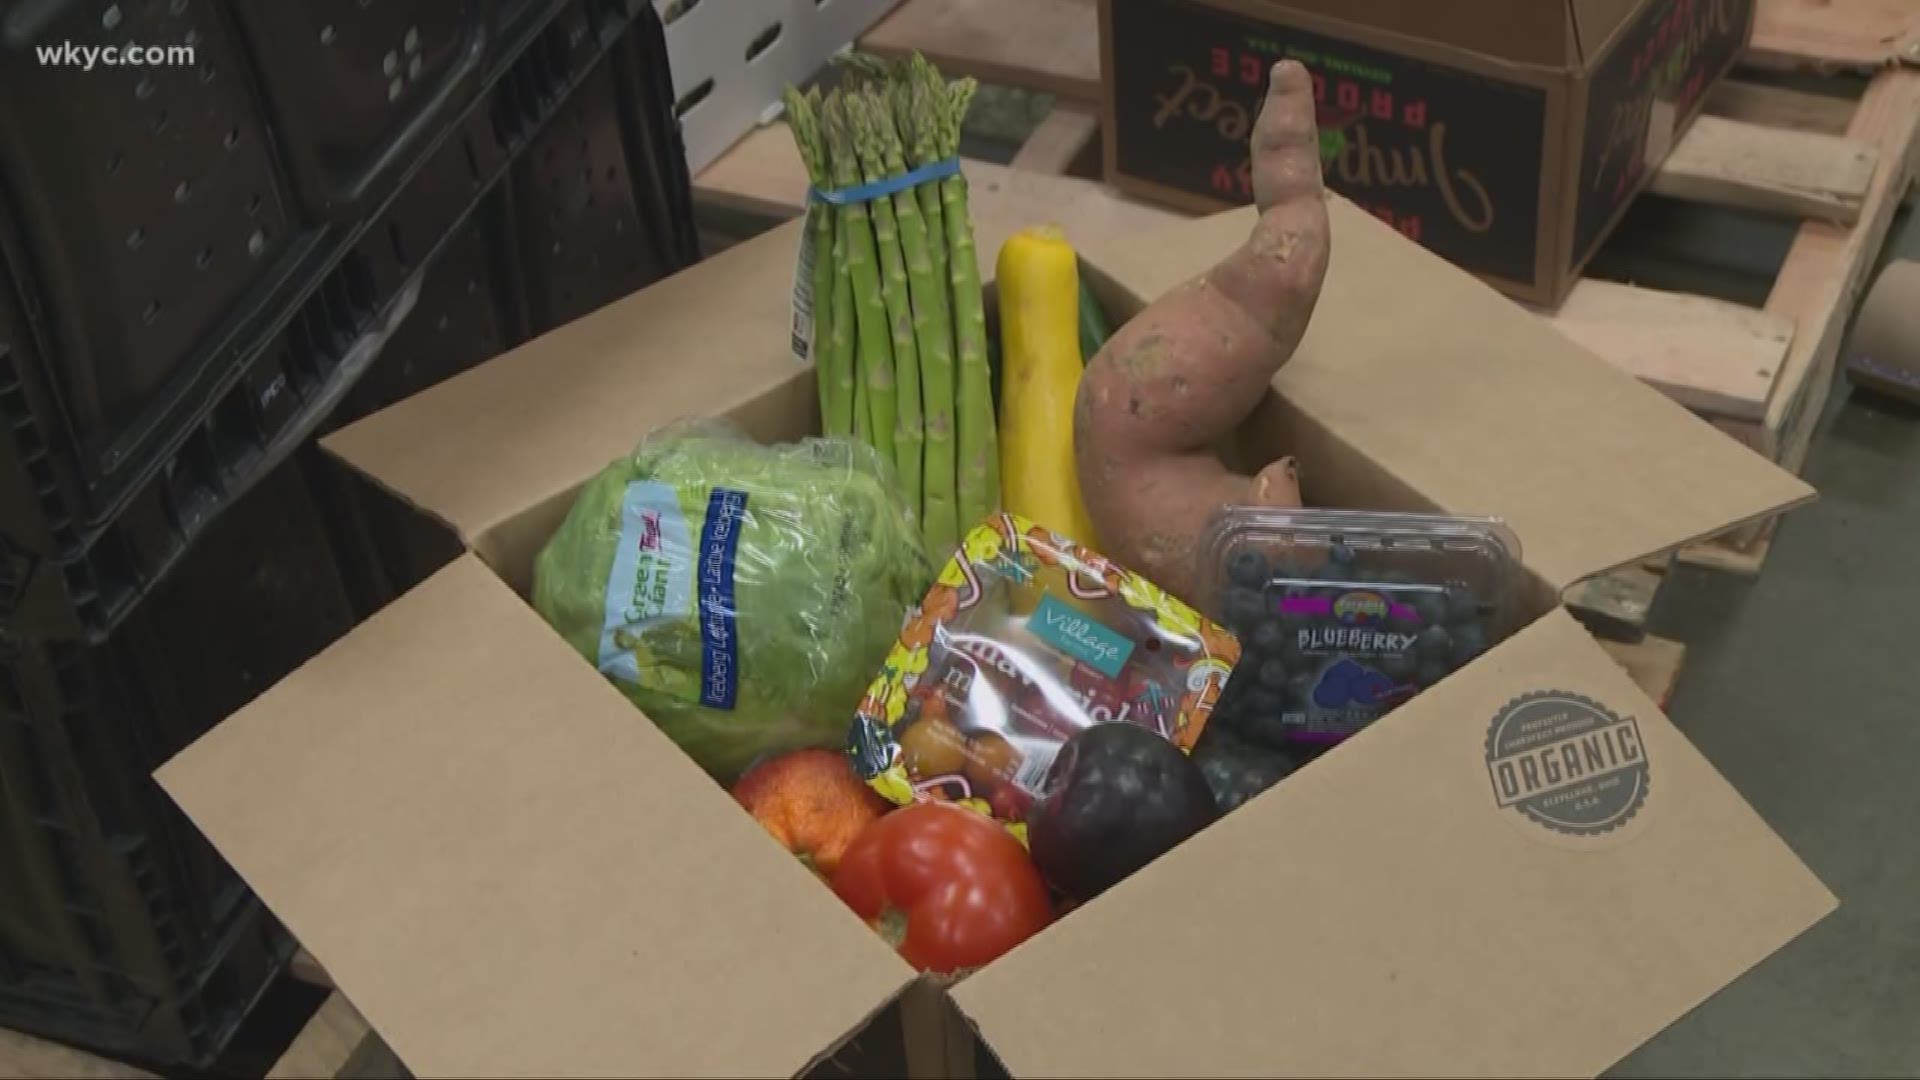 April 26, 2019: The company buys disfigured, surplus produce and delivers it to customers.